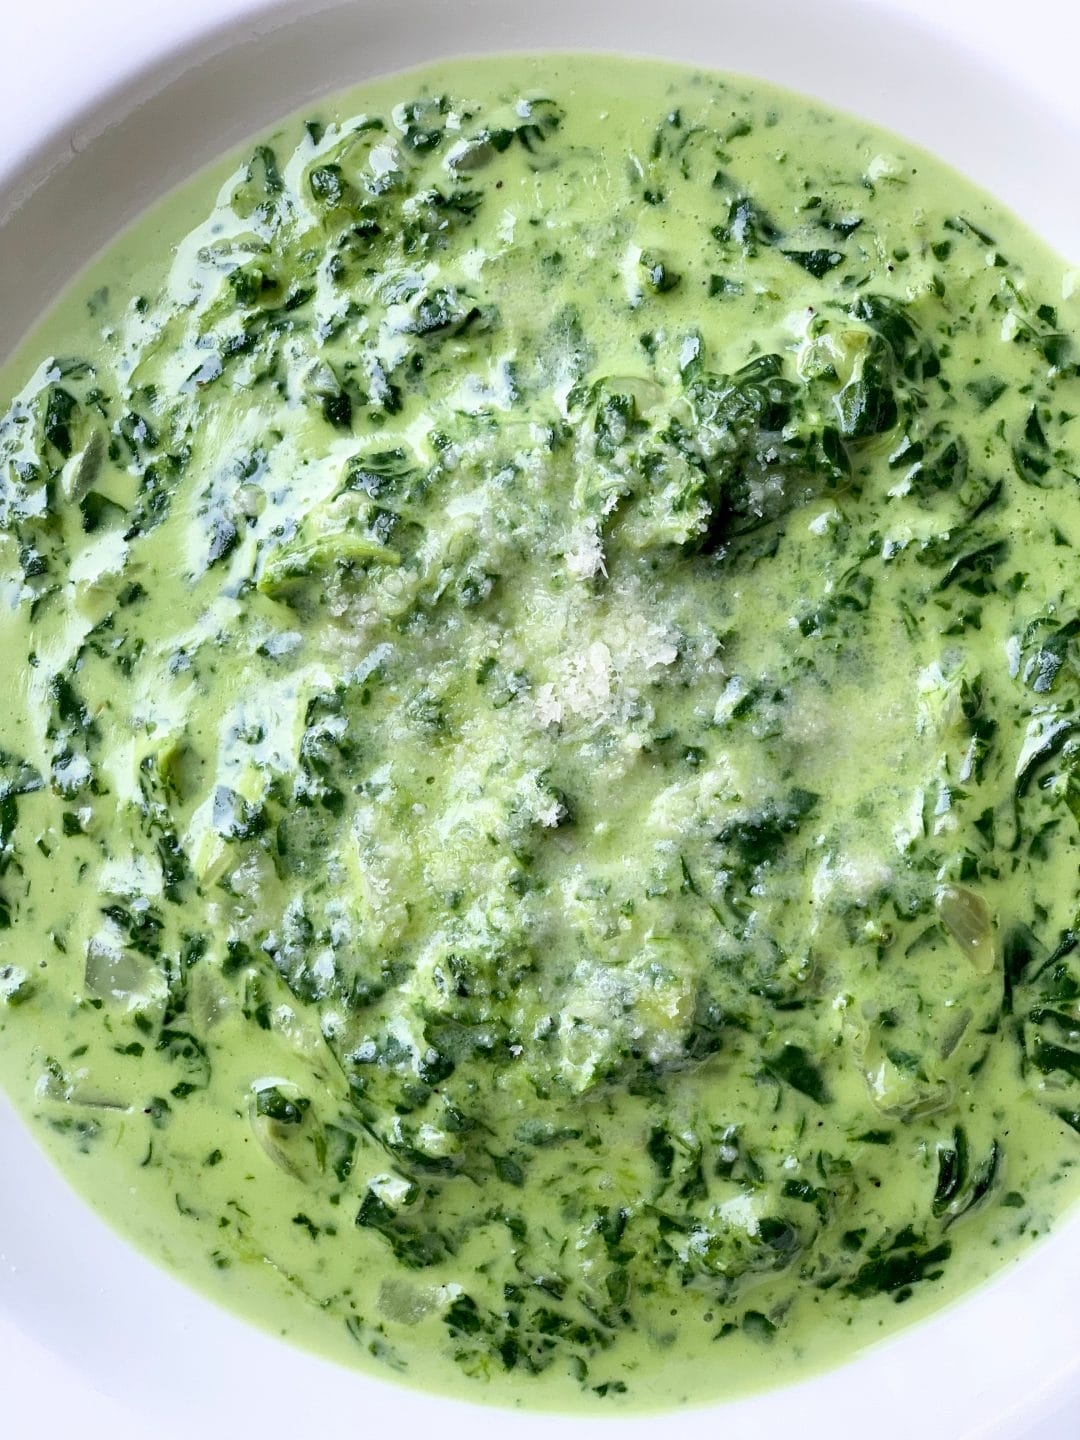 Picture of creamy spinach in a plate